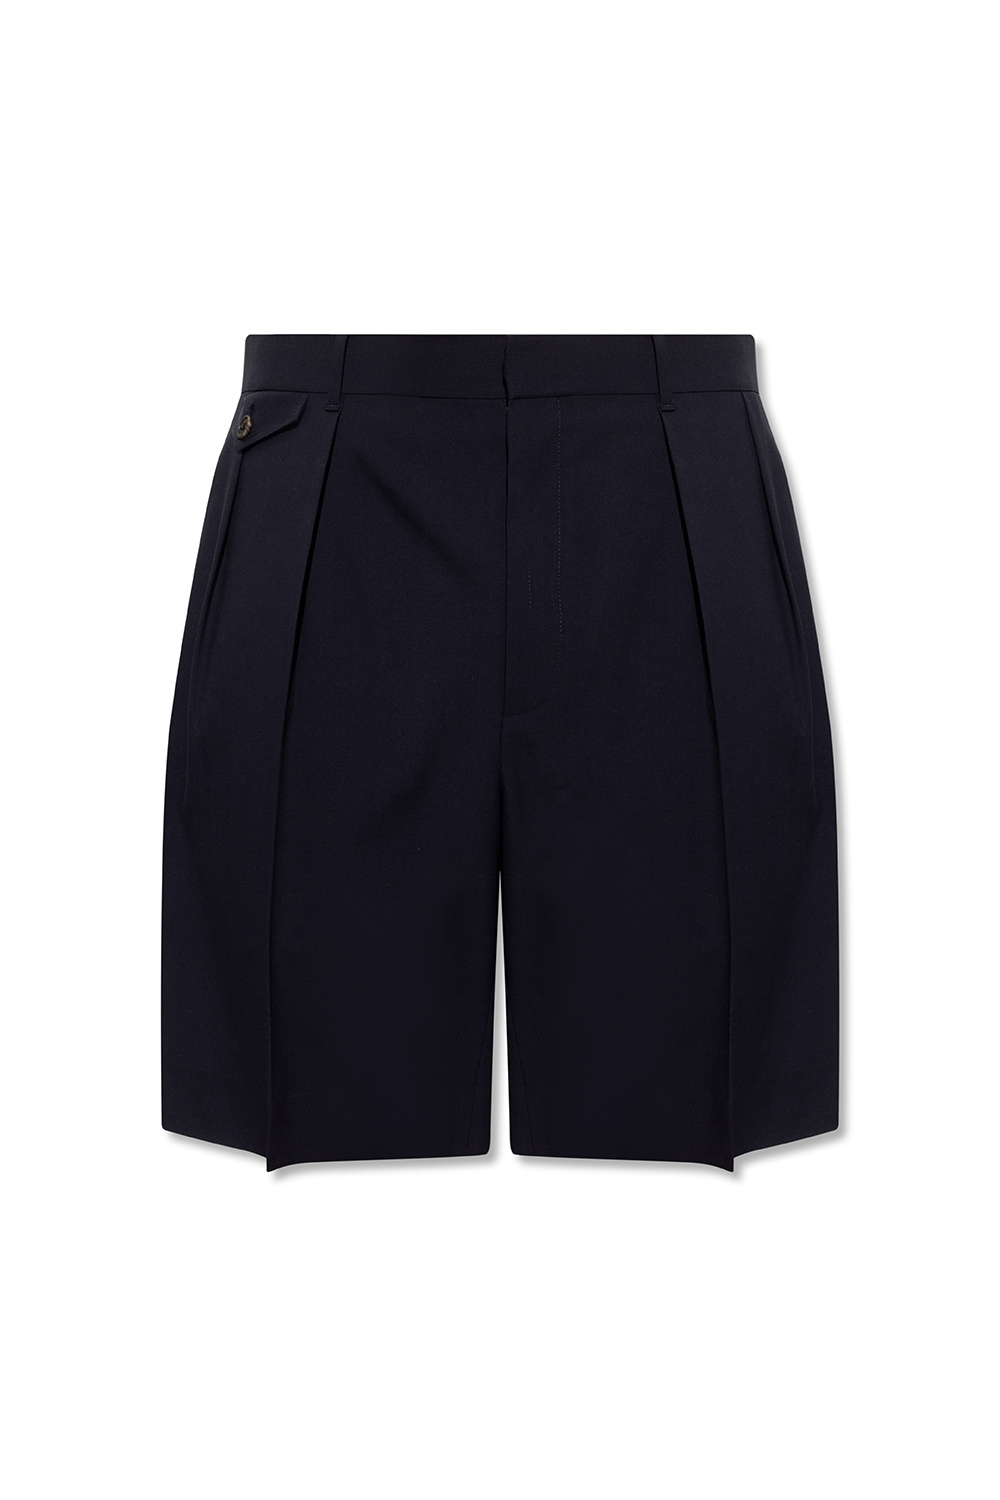 The Row ‘Cello’ pleat-front shorts